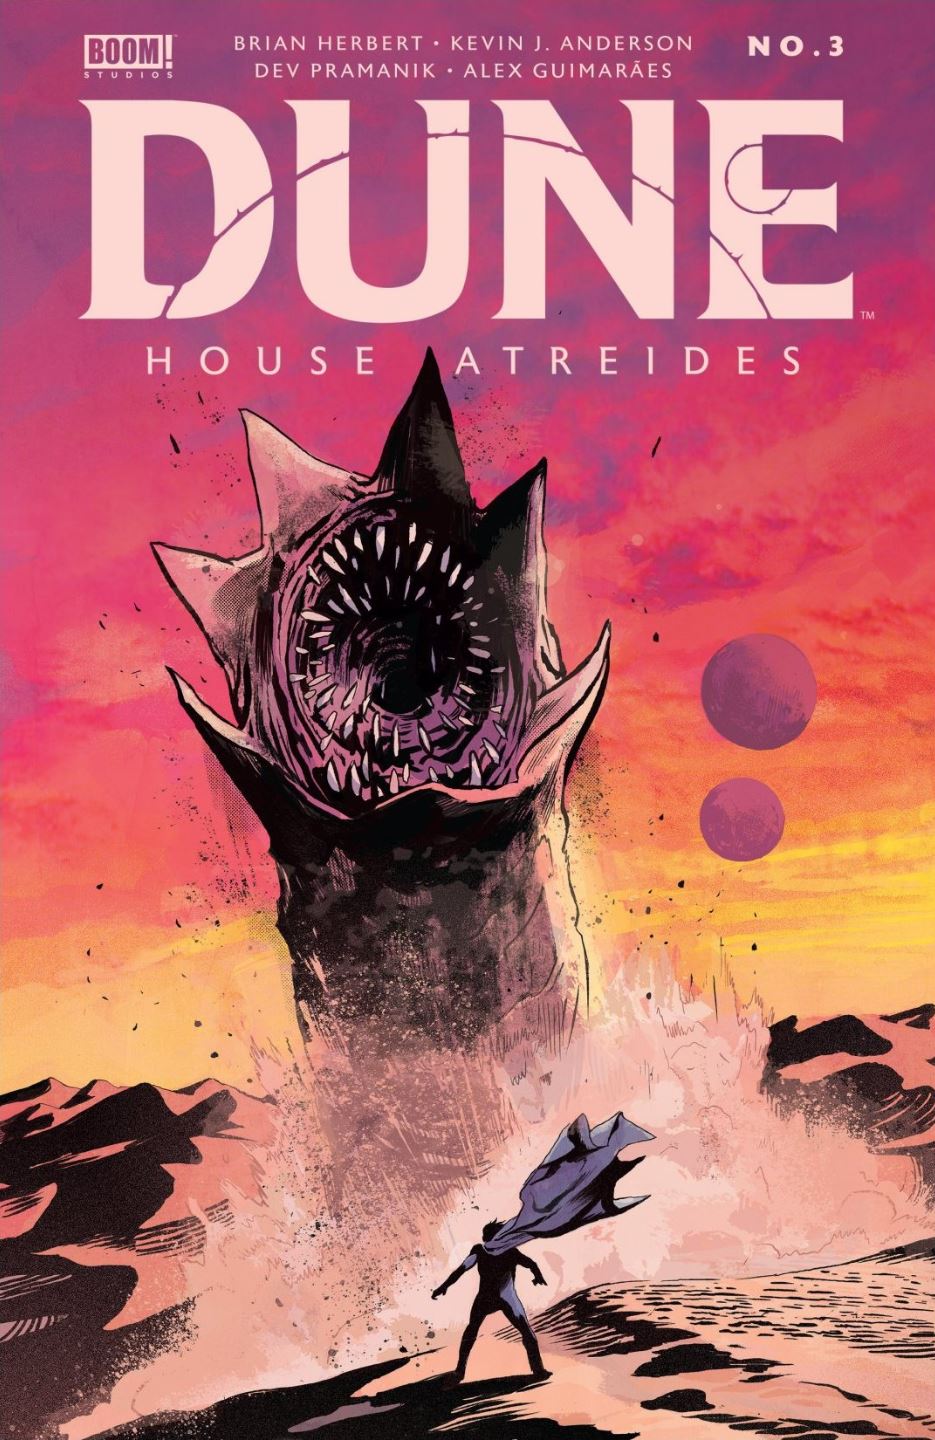 Dune House Atreides issue 3 cover by Michael Walsh